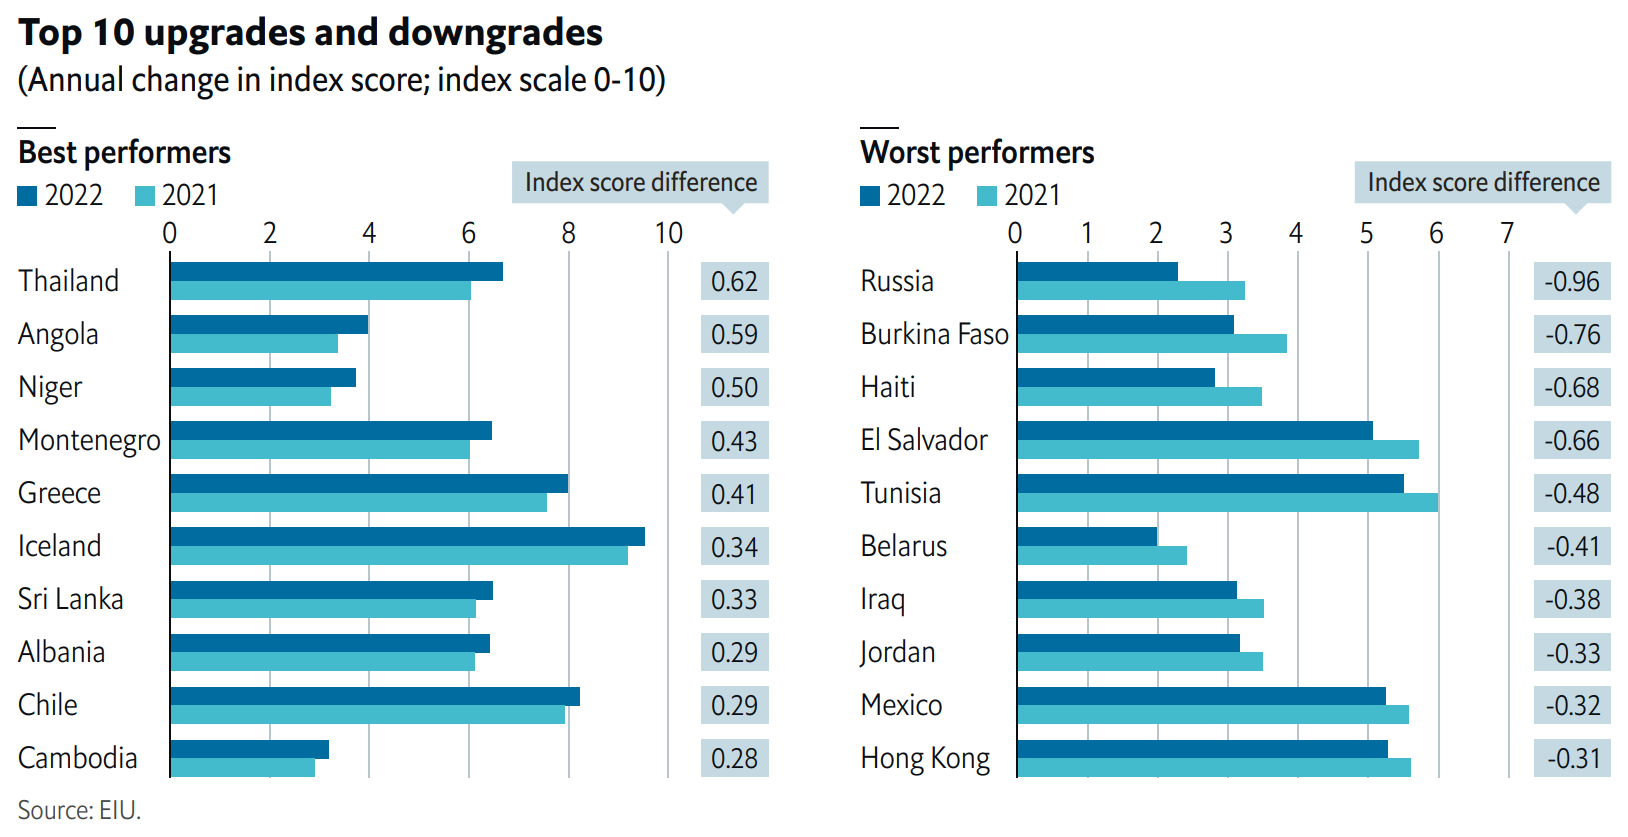 Top 10 upgrades and downgrades in the EIU Democracy Index 2022, annual change in index score. There were impressive democratic gains in some countries, but also some dramatic declines. Thailand recorded the biggest overall score improvement in 2022, increasing its total from 6.04 in 2021 to 6.67. Other big improvers were Angola and Niger, from a low base in the “authoritarian regime” category, and Montenegro and Greece, which are both classified as “flawed democracies”. Having improved its score by 0.41 points, Greece is now close to being reclassified as a “full democracy”. Foremost among the countries that performed poorly in 2022 was Russia, which had the biggest deterioration in score of any country in the world. Russia’s score dropped by 0.96 points to 2.28 from 3.24 in 2021 and its global ranking fell from 124th (out of 167) to 146th, close to the bottom of the global rankings. Belarus, whose president Alyaksandar Lukashenka is closely allied with his Russian counterpart, also suffered a sharp fall in its Democracy Index score. Other countries that registered a sharp decline in their index scores, also from a low base, included Burkina Faso in west Africa, where an Islamist insurgency has resulted in the state losing control of vast swathes of territory, the displacement of about 1.7m people and the deaths of thousands. Haiti, the poorest country in the western hemisphere, appears to be in a state of internal dissolution, as the authorities have lost control completely. Several countries in Latin America, including El Salvador and Mexico, register big negative changes in their scores in 2022. In the Middle East and North Africa, the worst-performing region in terms of its absolute score and its year-on-year score change, Tunisia, Iraq, and Jordan all register sharp declines in their scores. Graphic: EIU